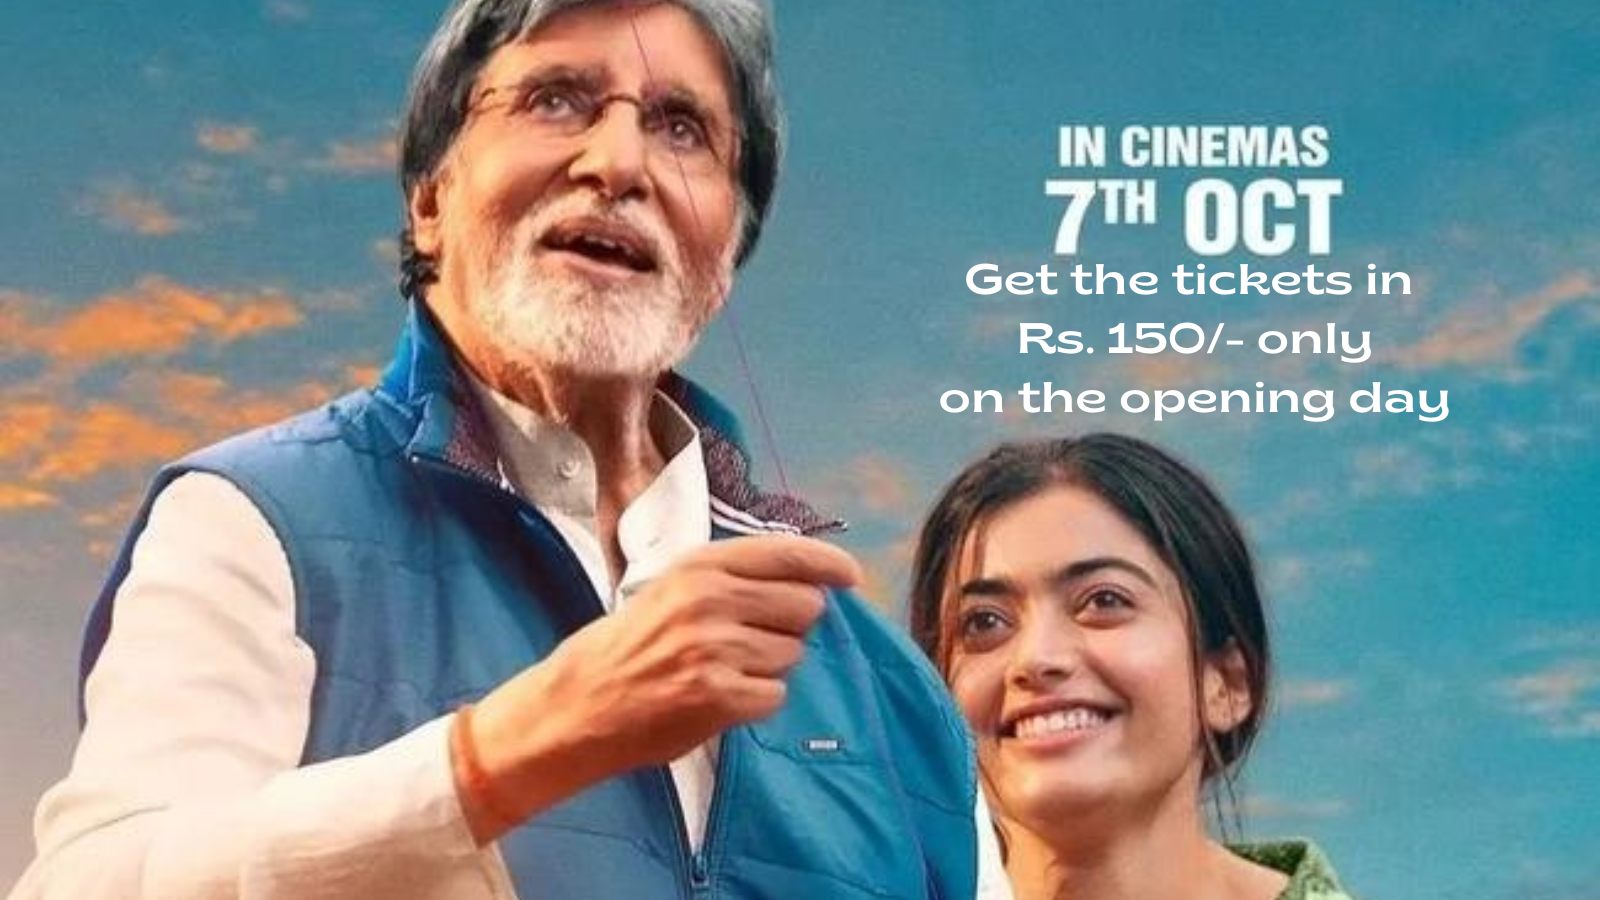 Goodbye Get the tickets in Rs. 150- only